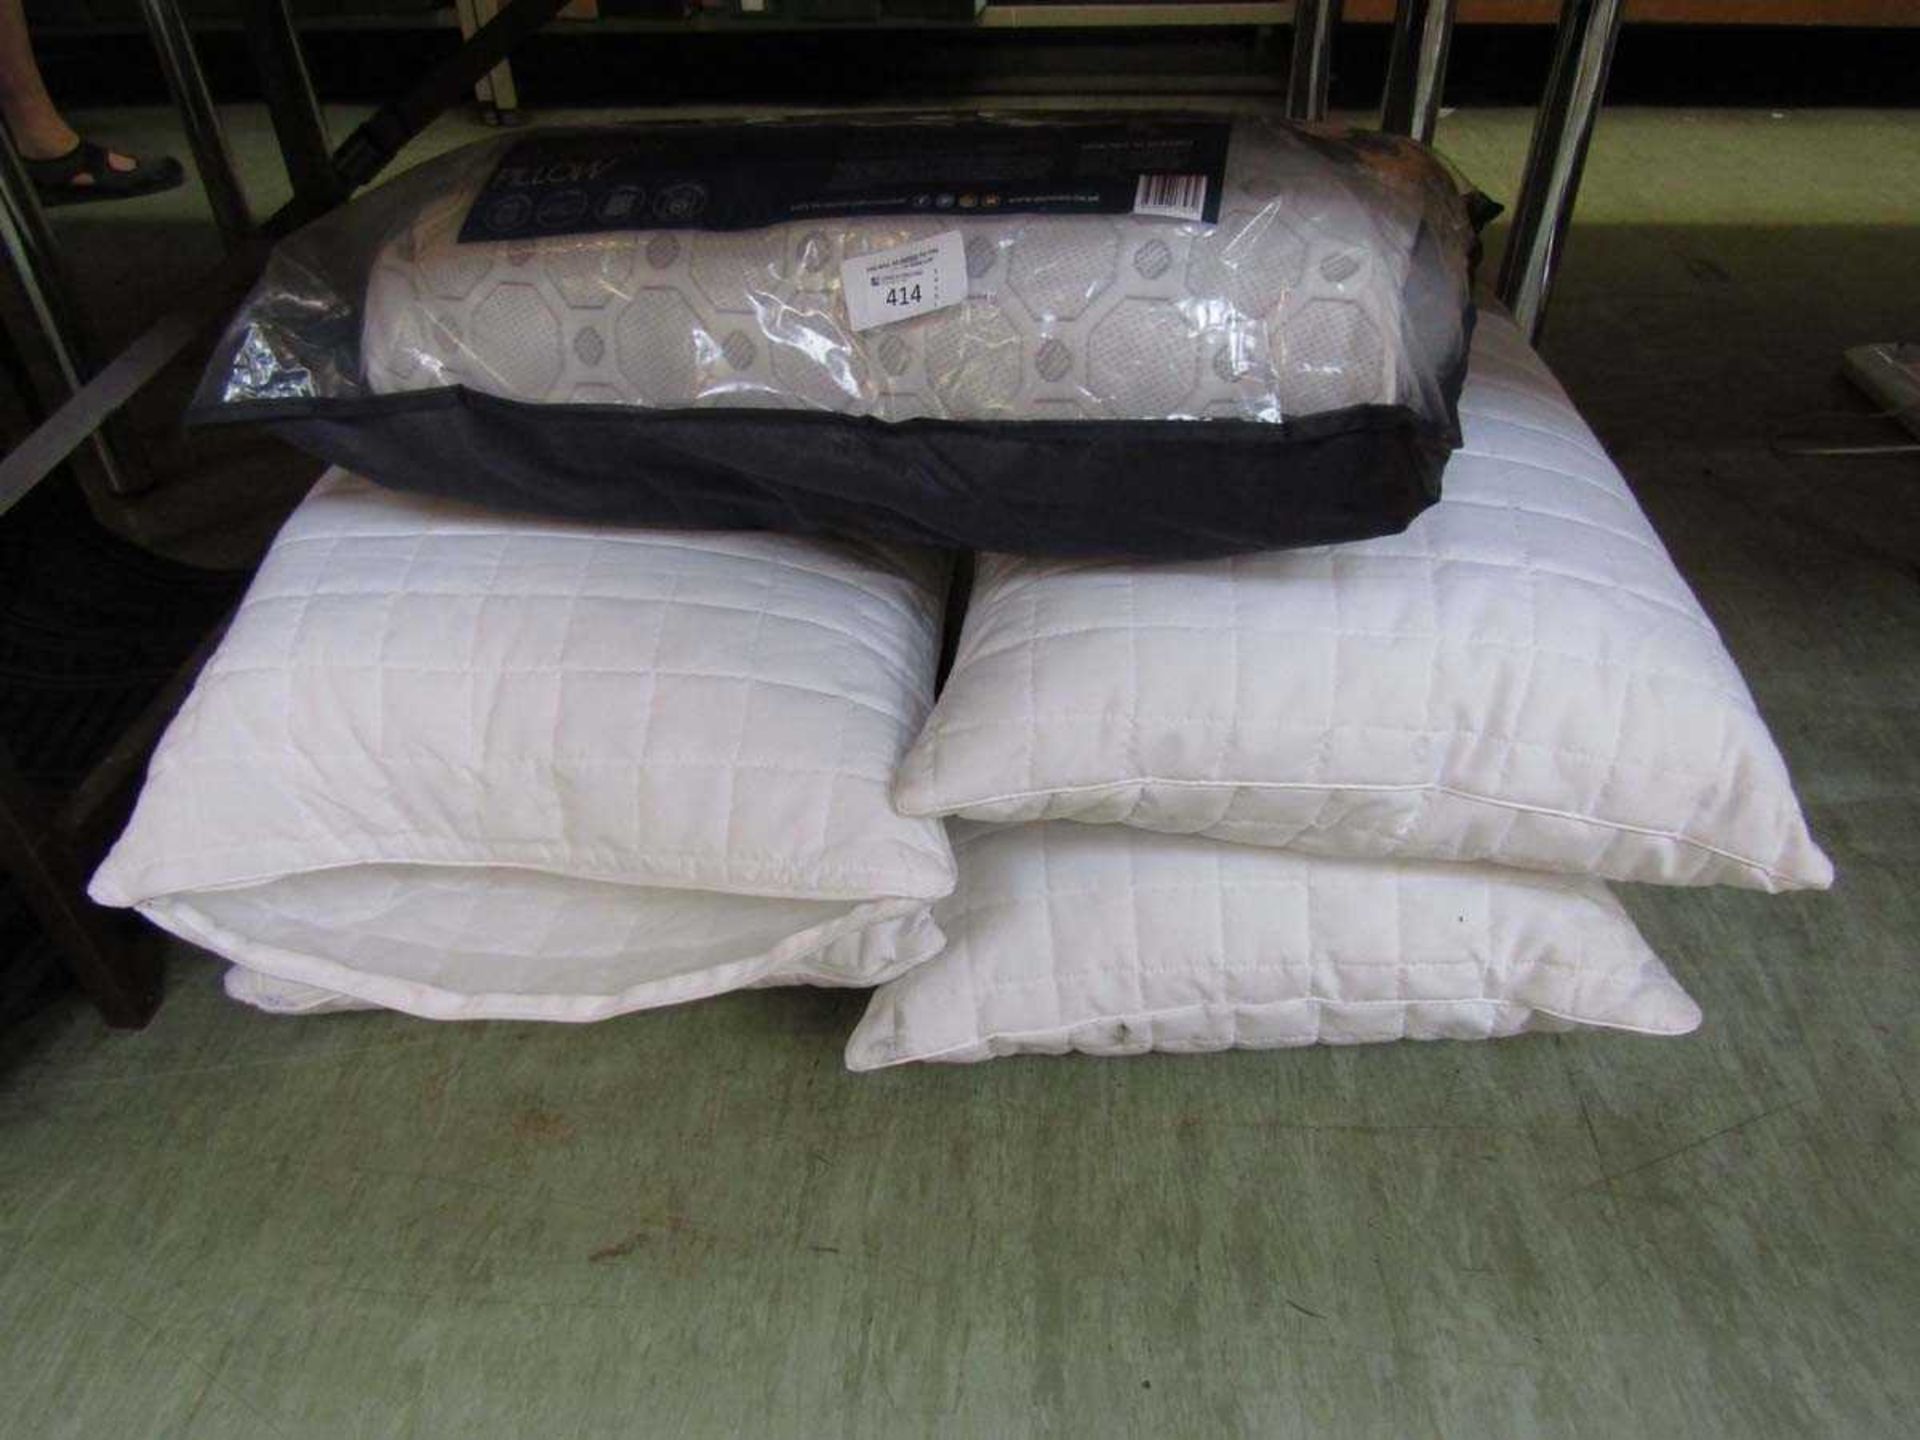 +VAT A packaged Dormio 'Octasense' pillow along with four other unboxed pillows